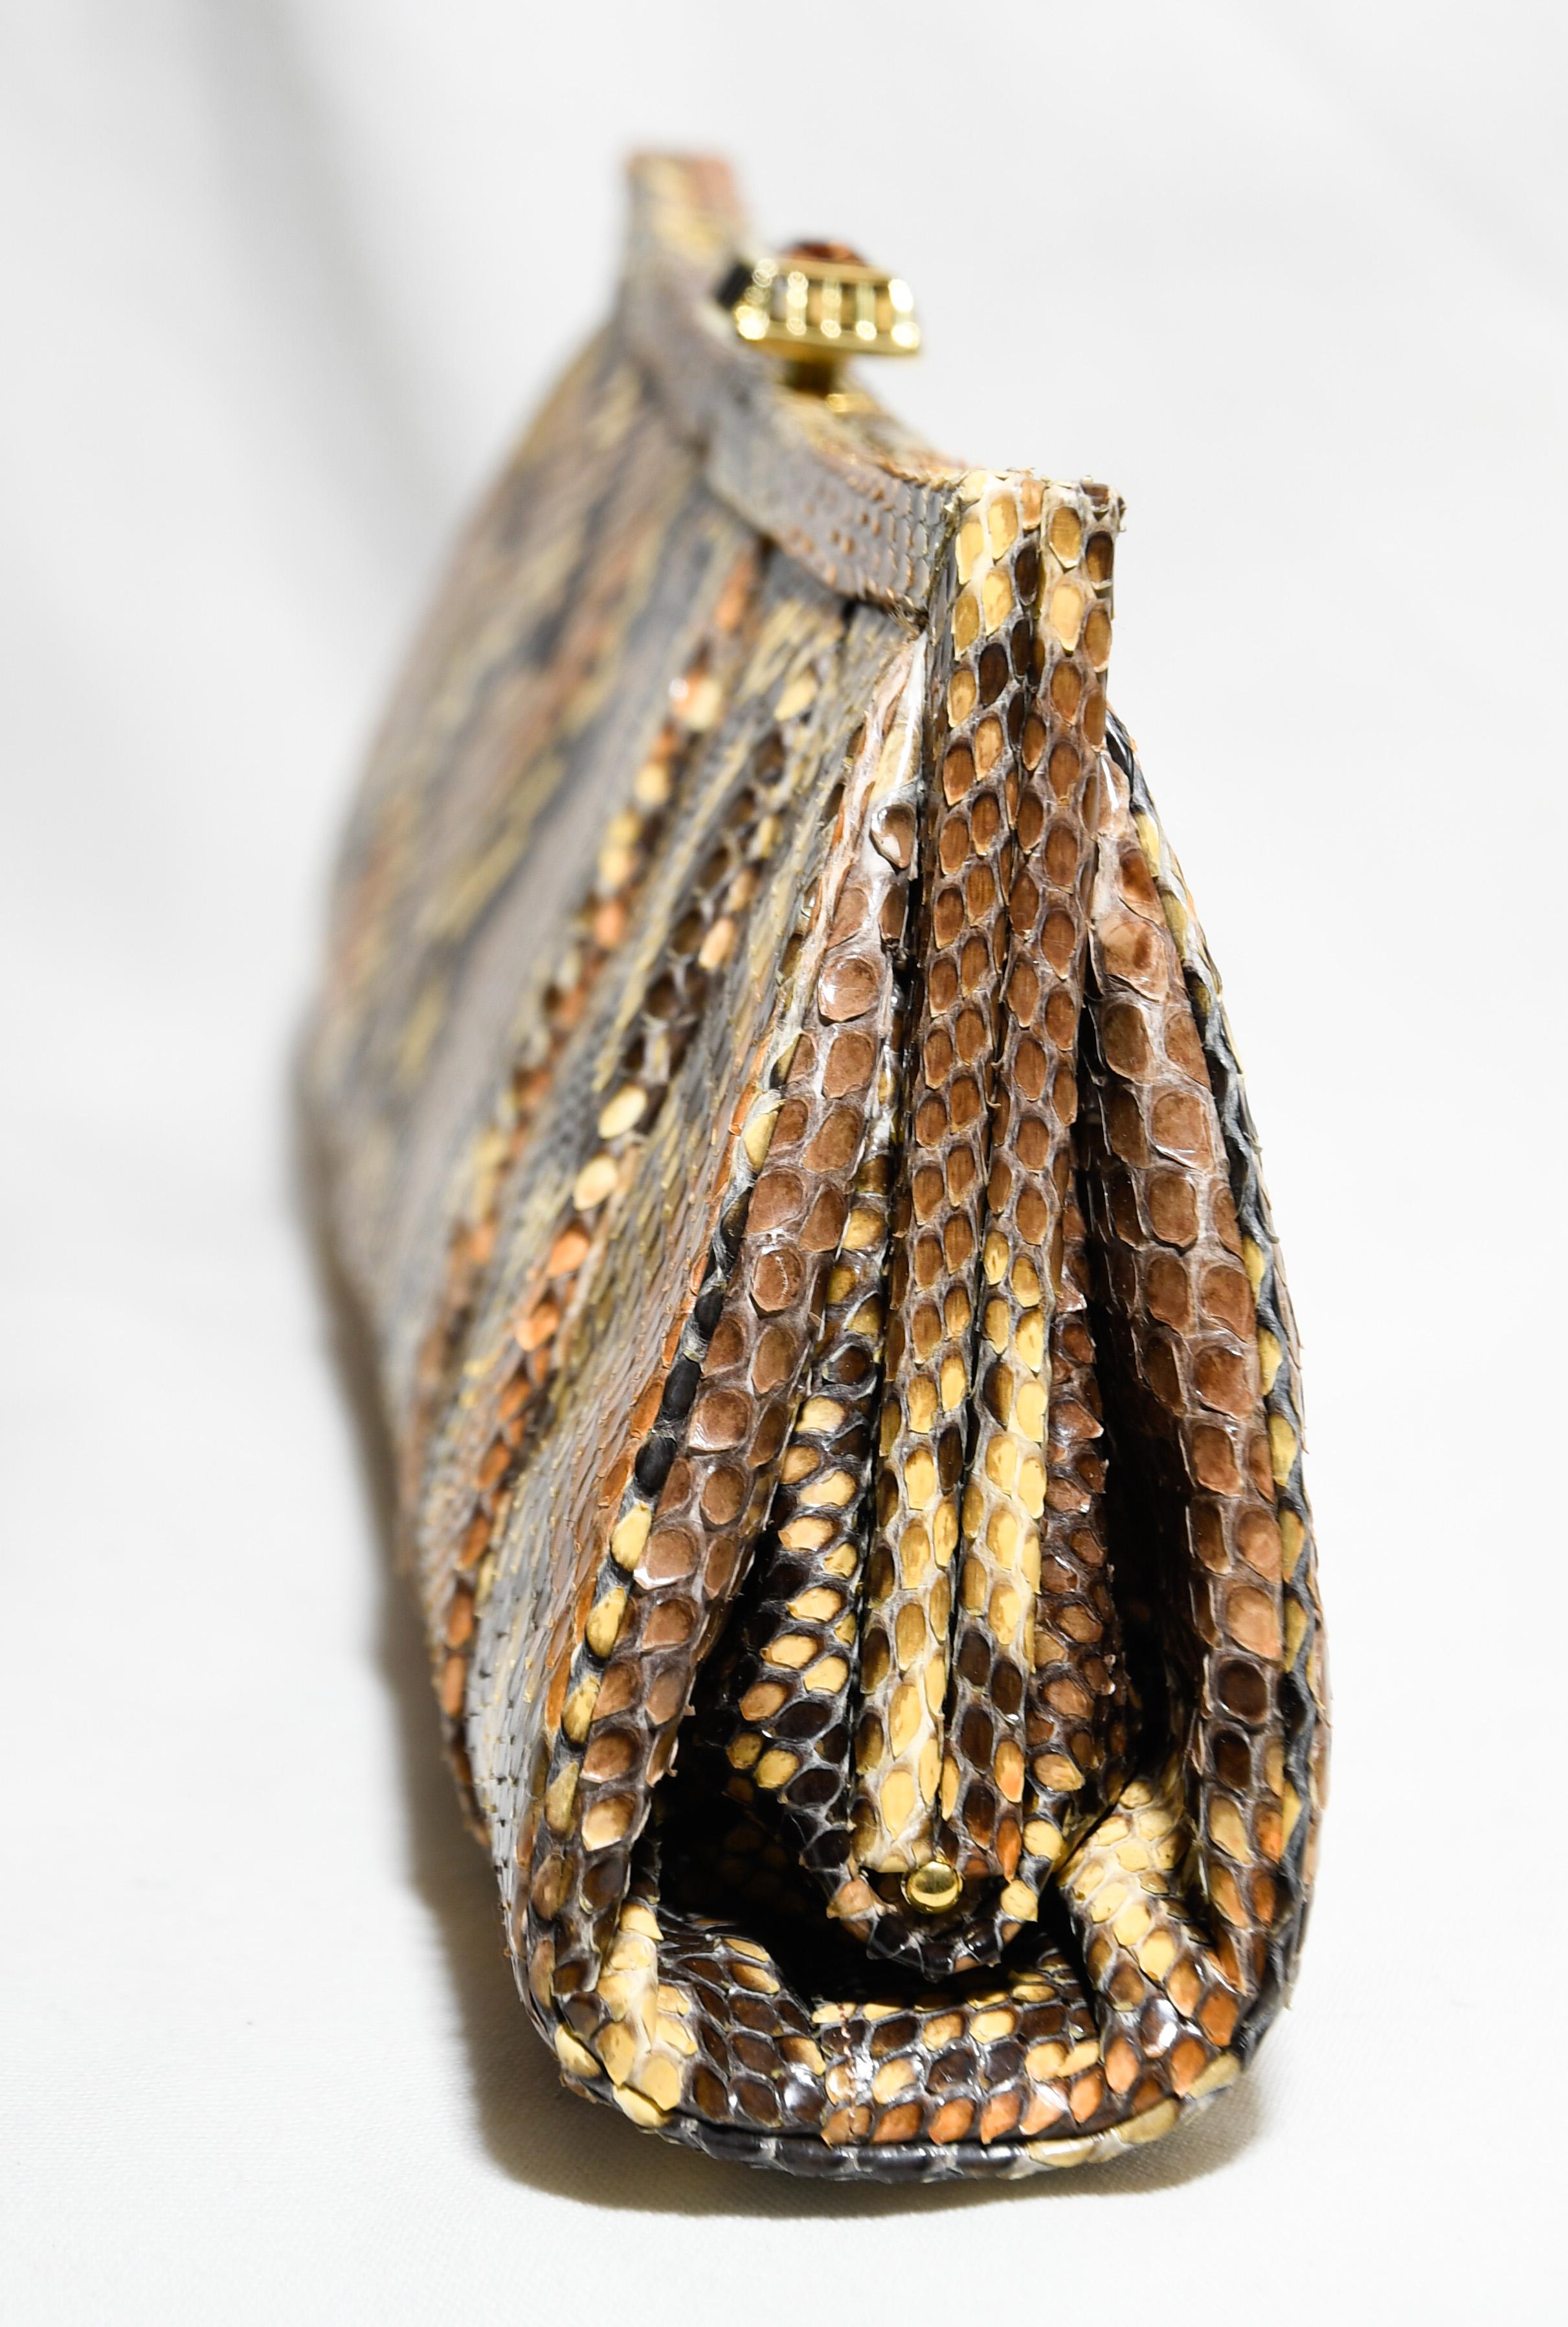 Judith Leiber brown, beige and orange pleated python bag can be worn as a clutch or a shoulder bag.  A brown jeweled push lock  at top of snakeskin frame, for closure.  This pleated snakeskin clutch is dramatic and can be paired with many ensembles